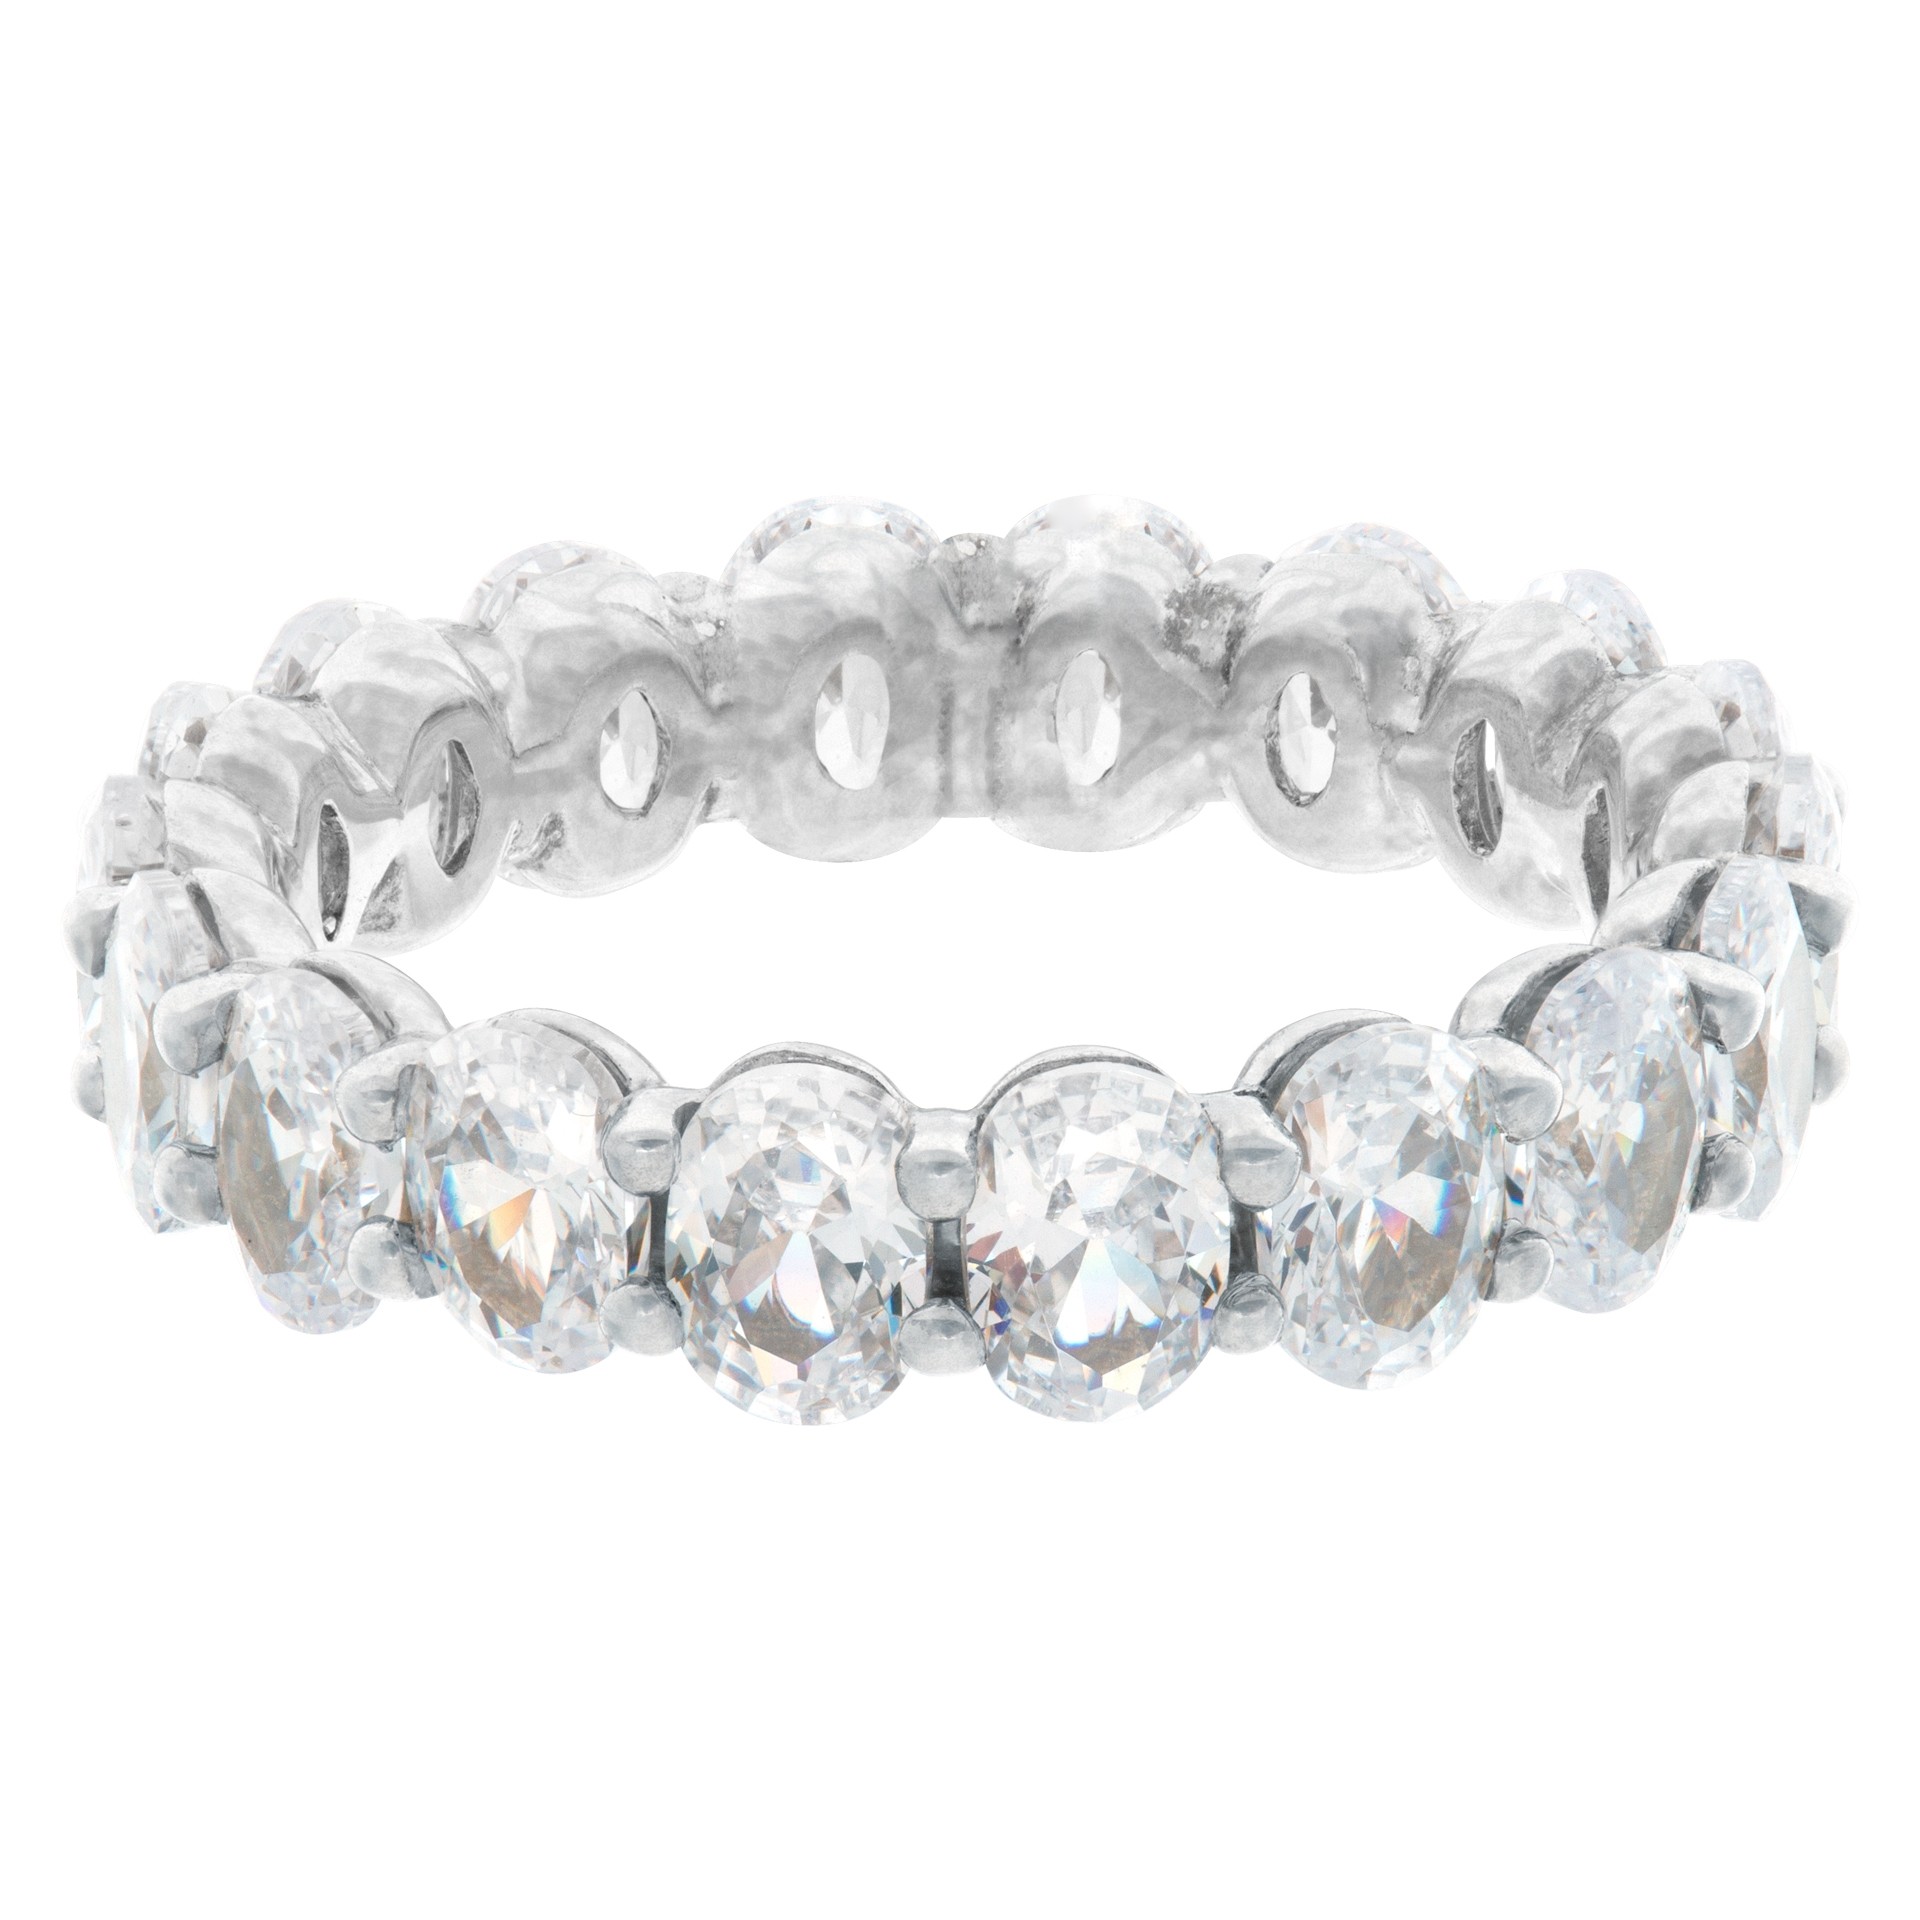 3.6ct Oval Cut Diamond eternity band or ring in platinum